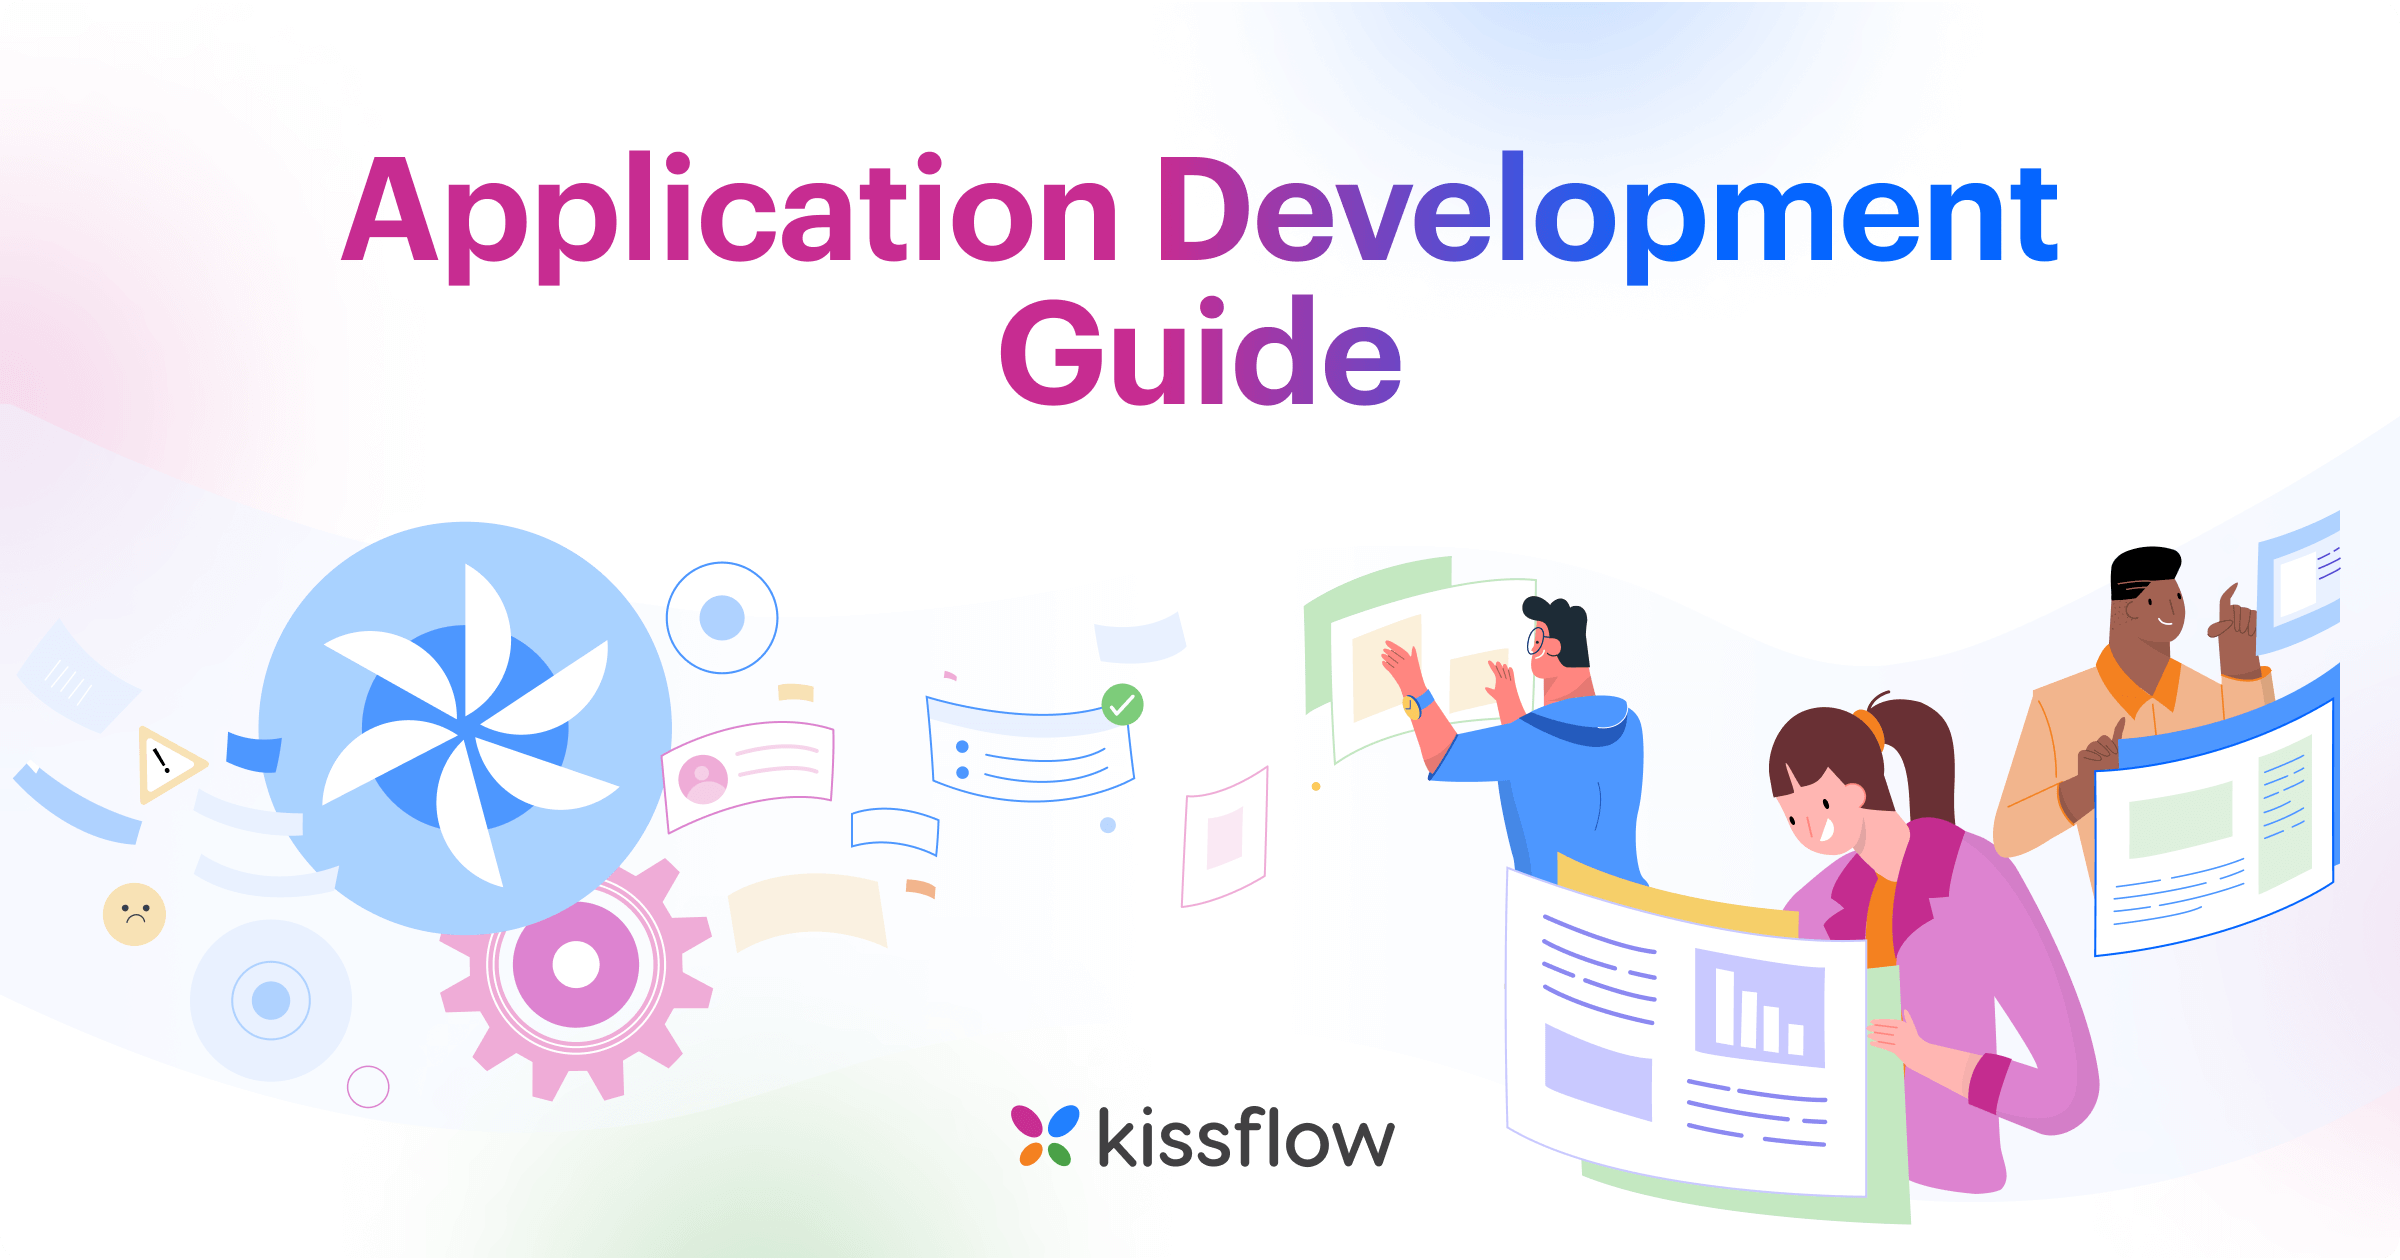 Guide to application development